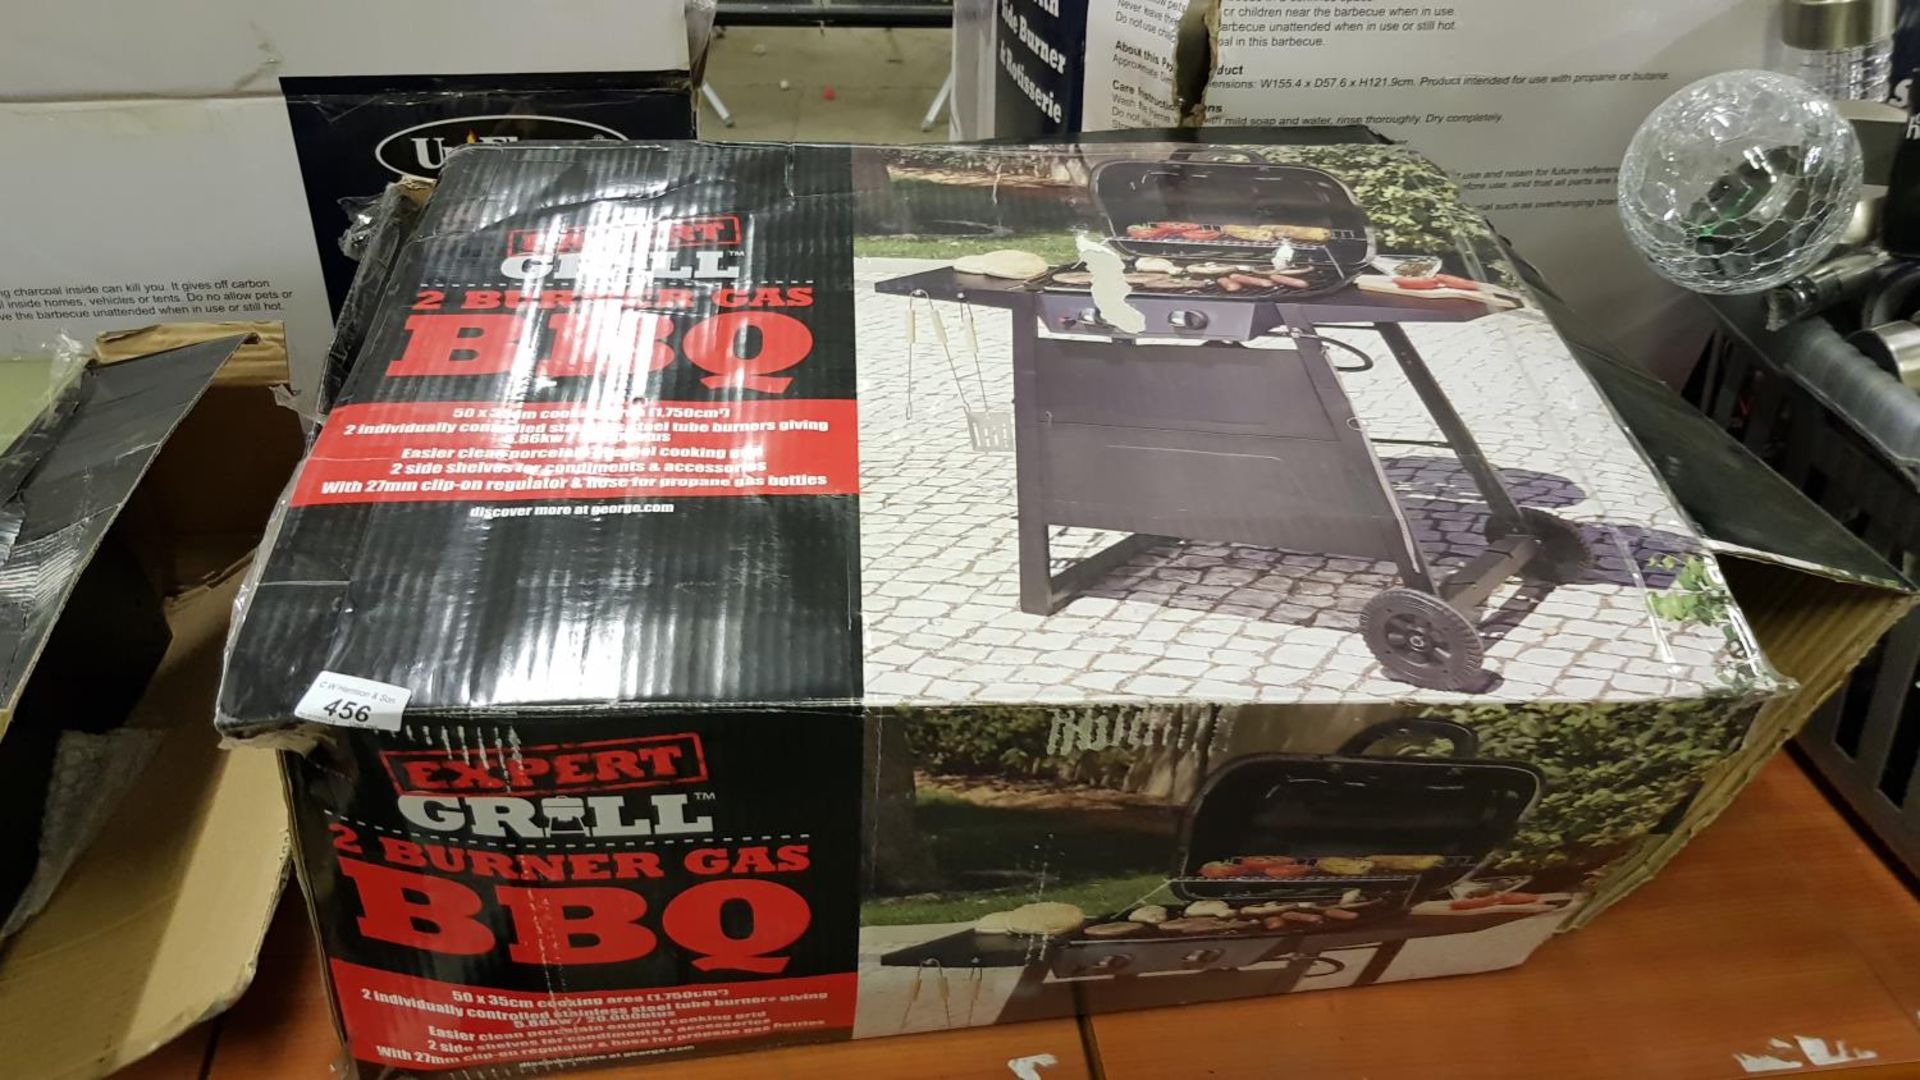 Expert Grill 2 Burner Gas BBQ – boxed/unchecked